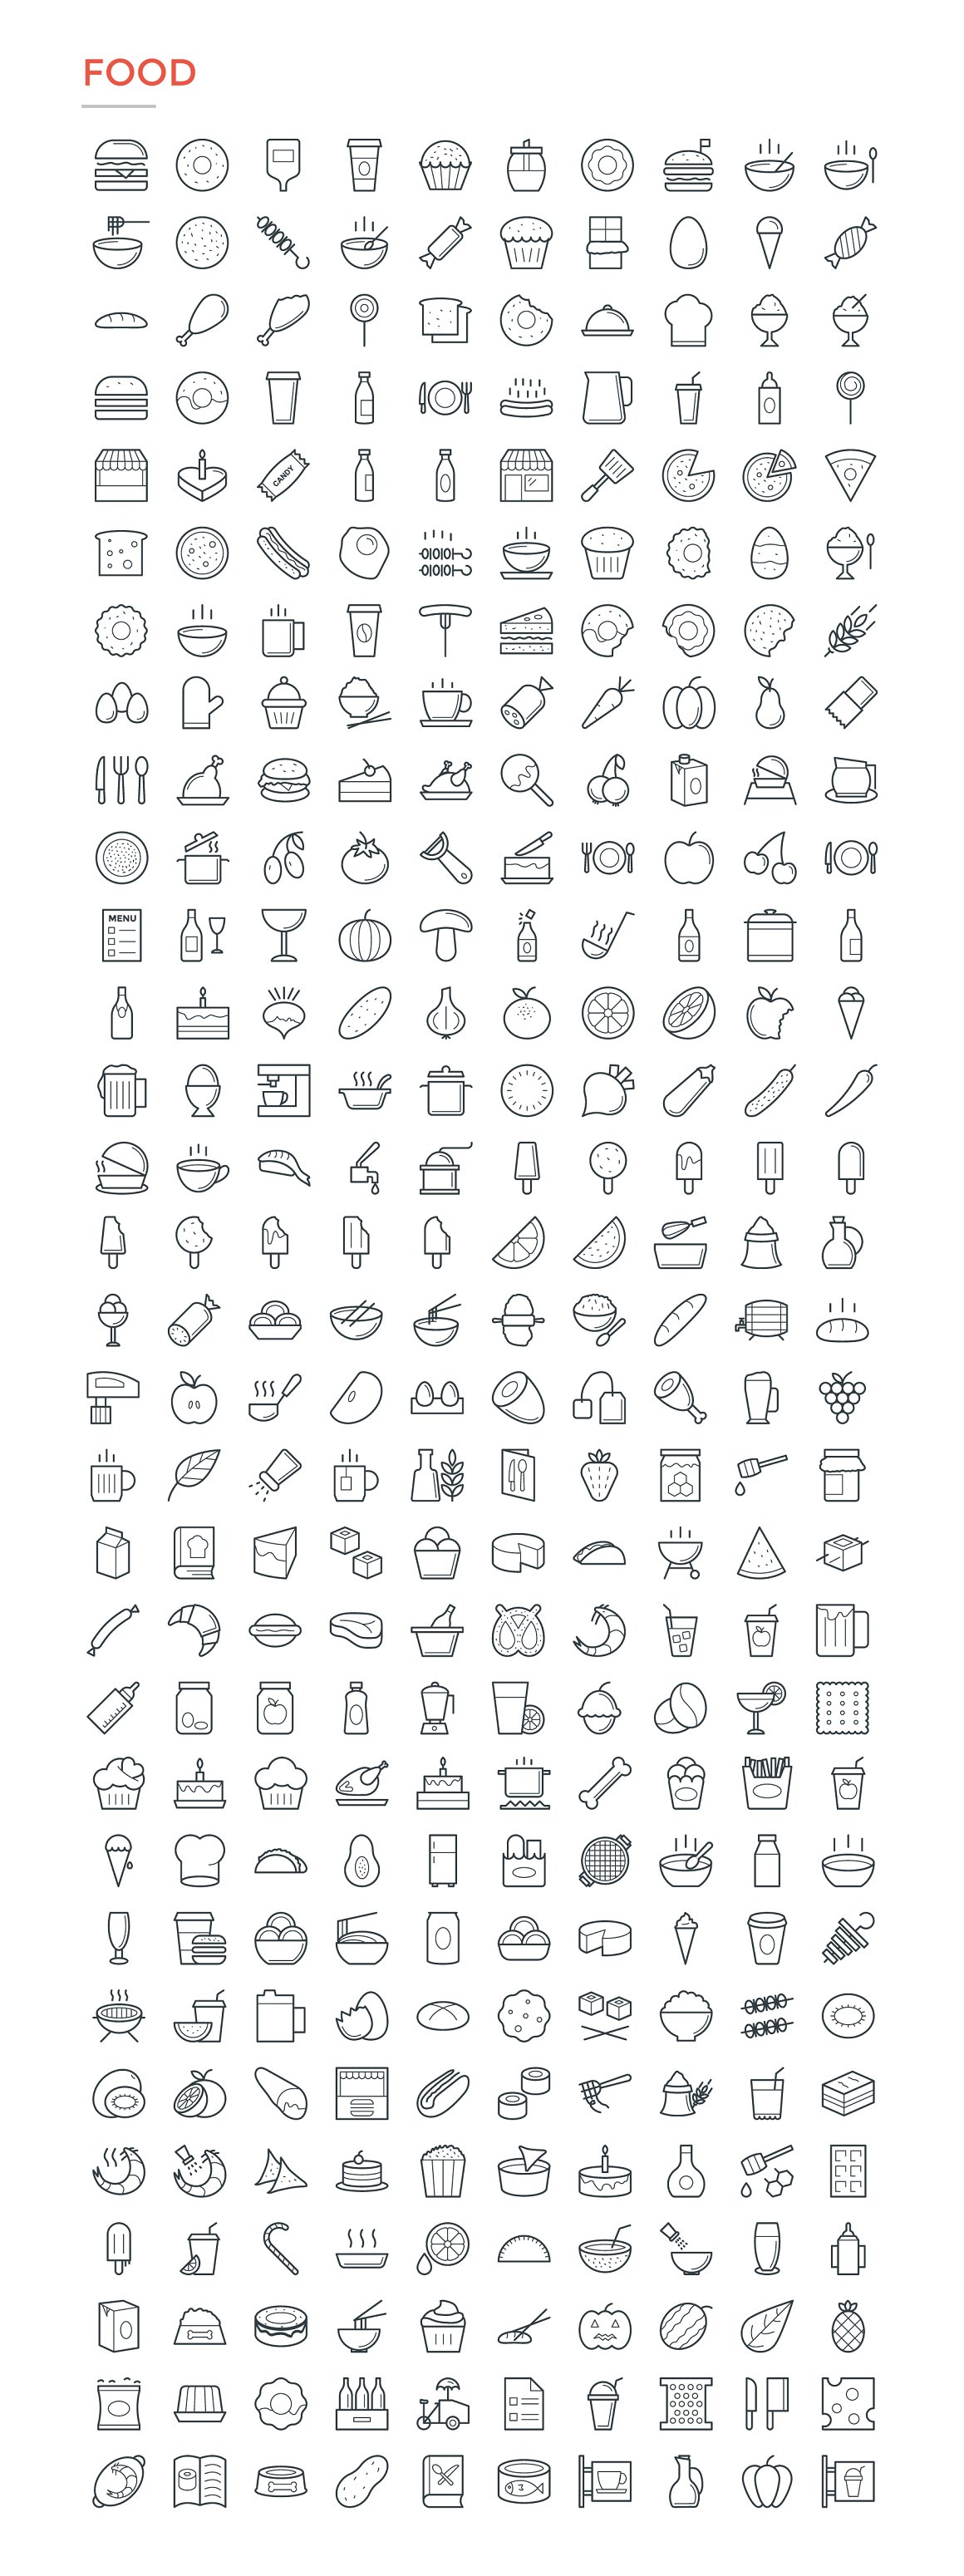 Food pack of different black icons on a white background.